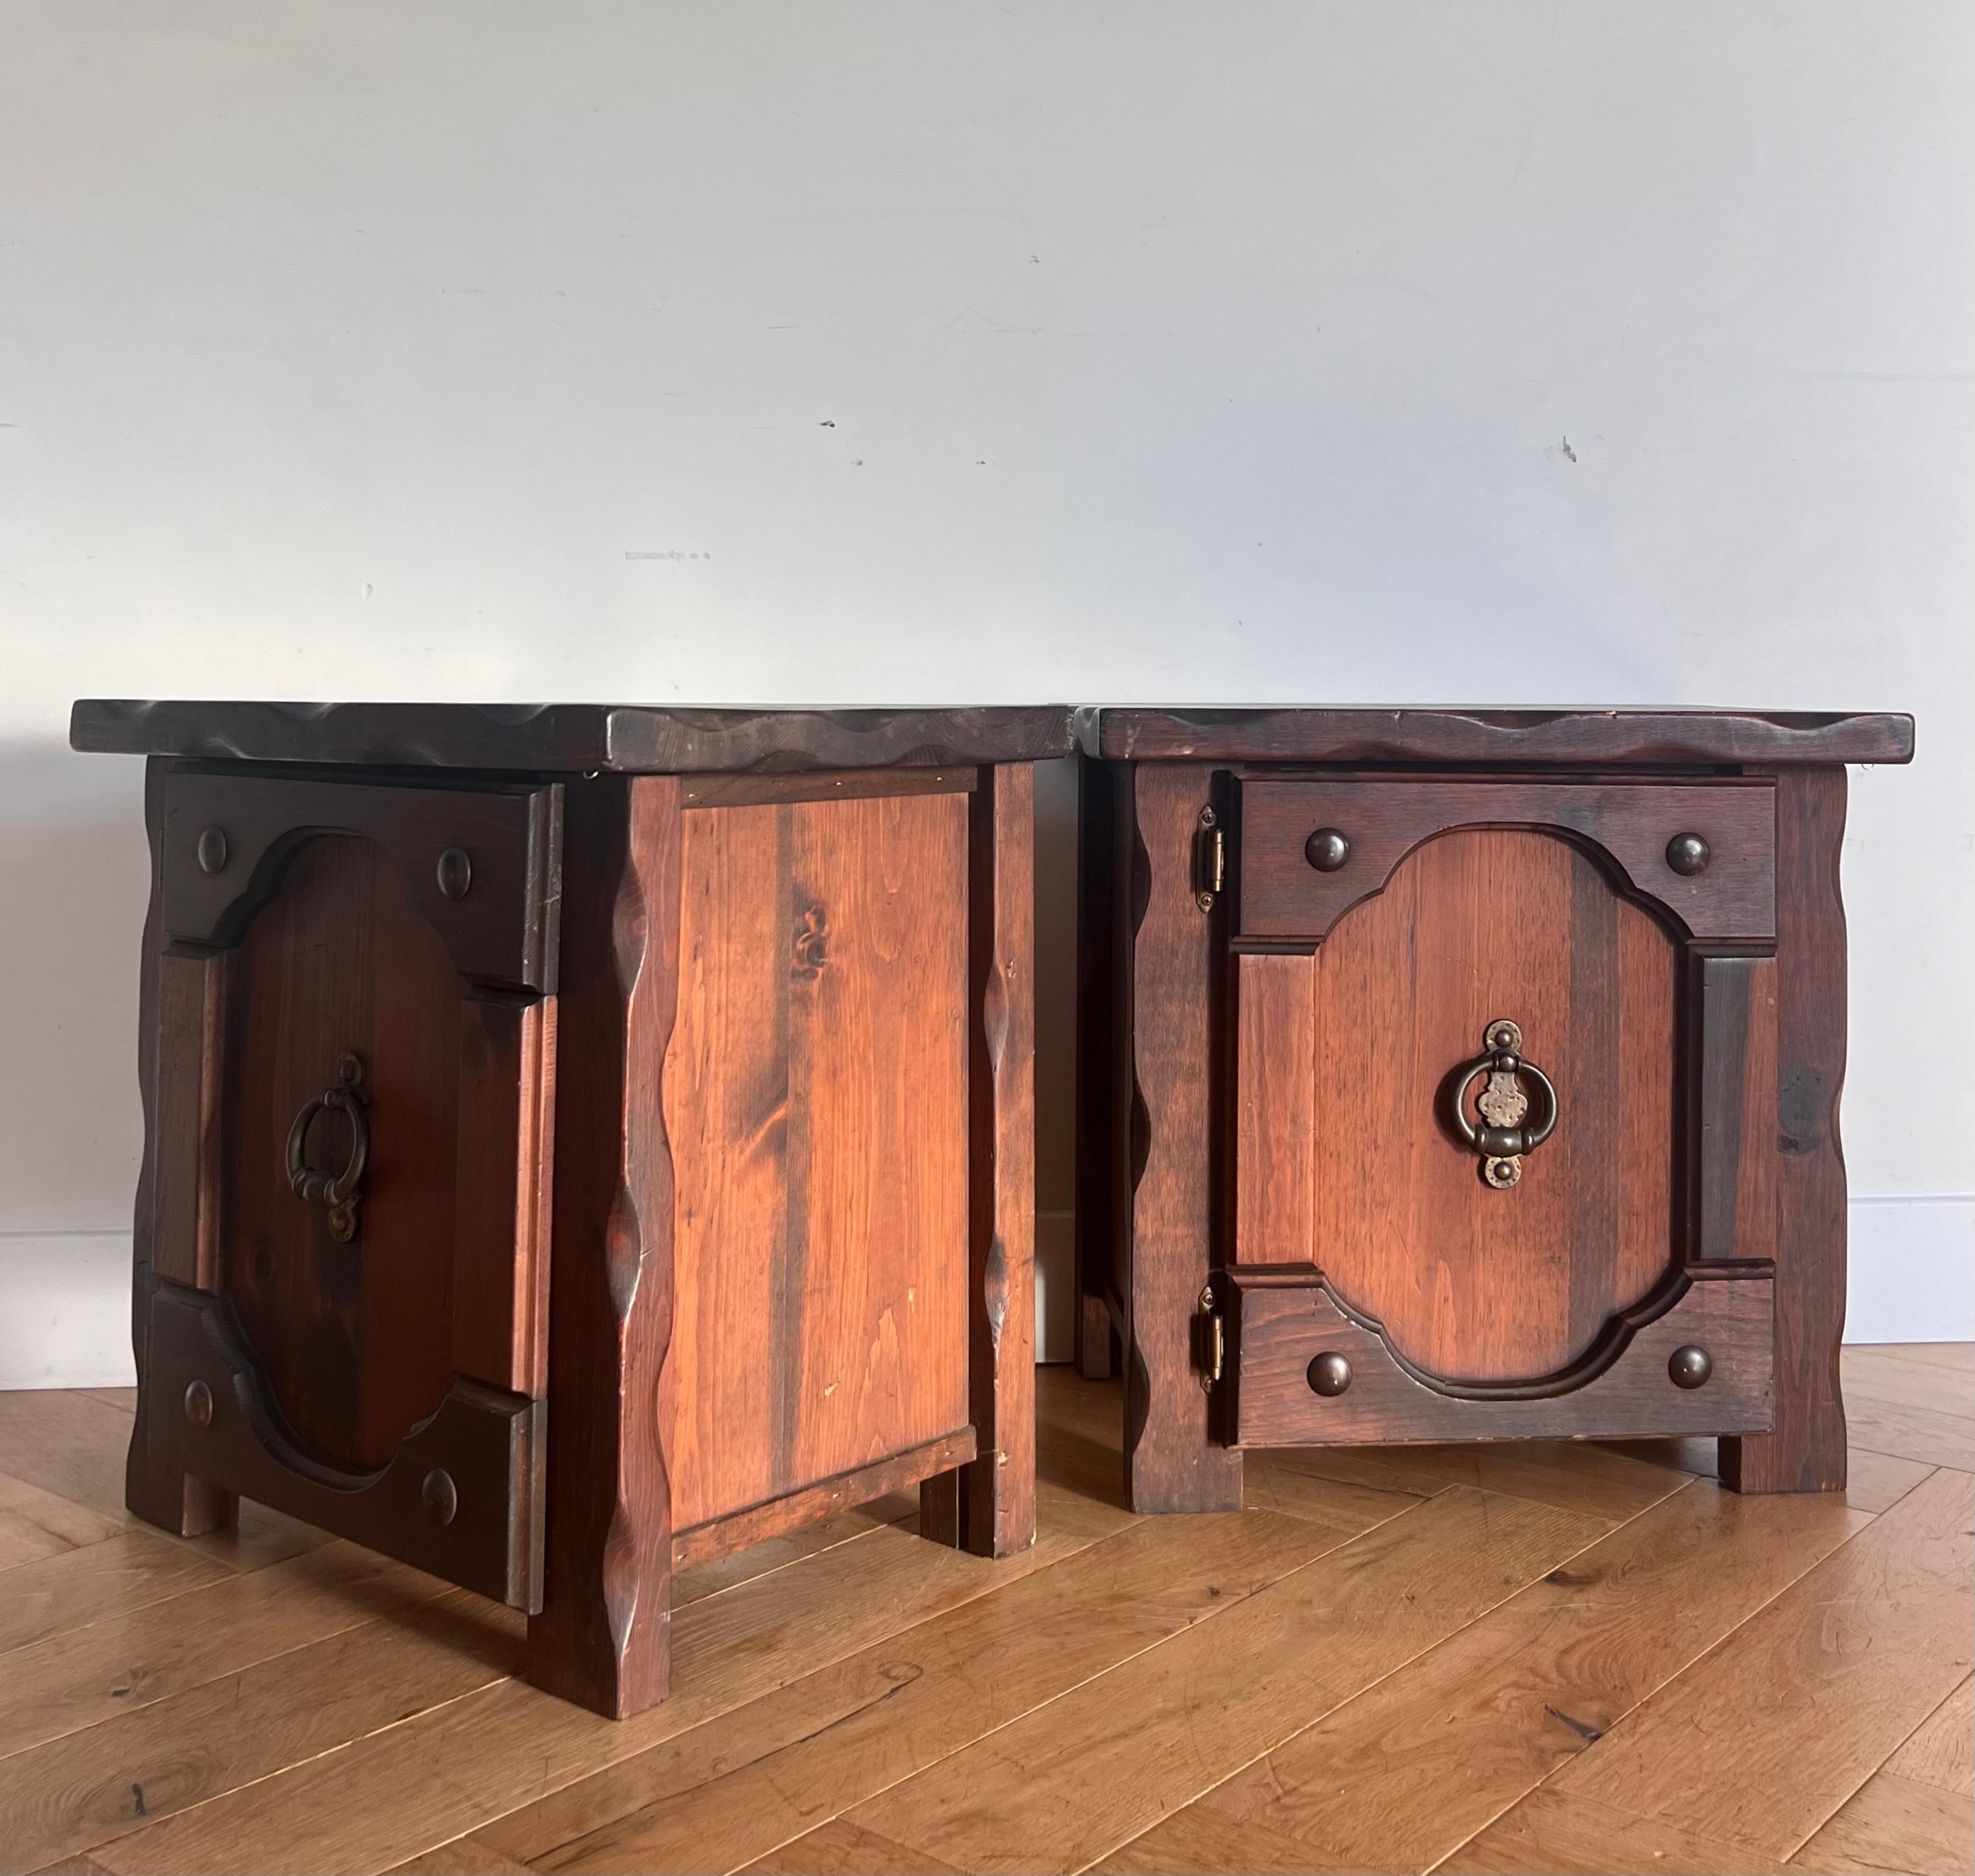 Mission craftsman gothic wooden nightstands with iron hardware, circa 1970 For Sale 6